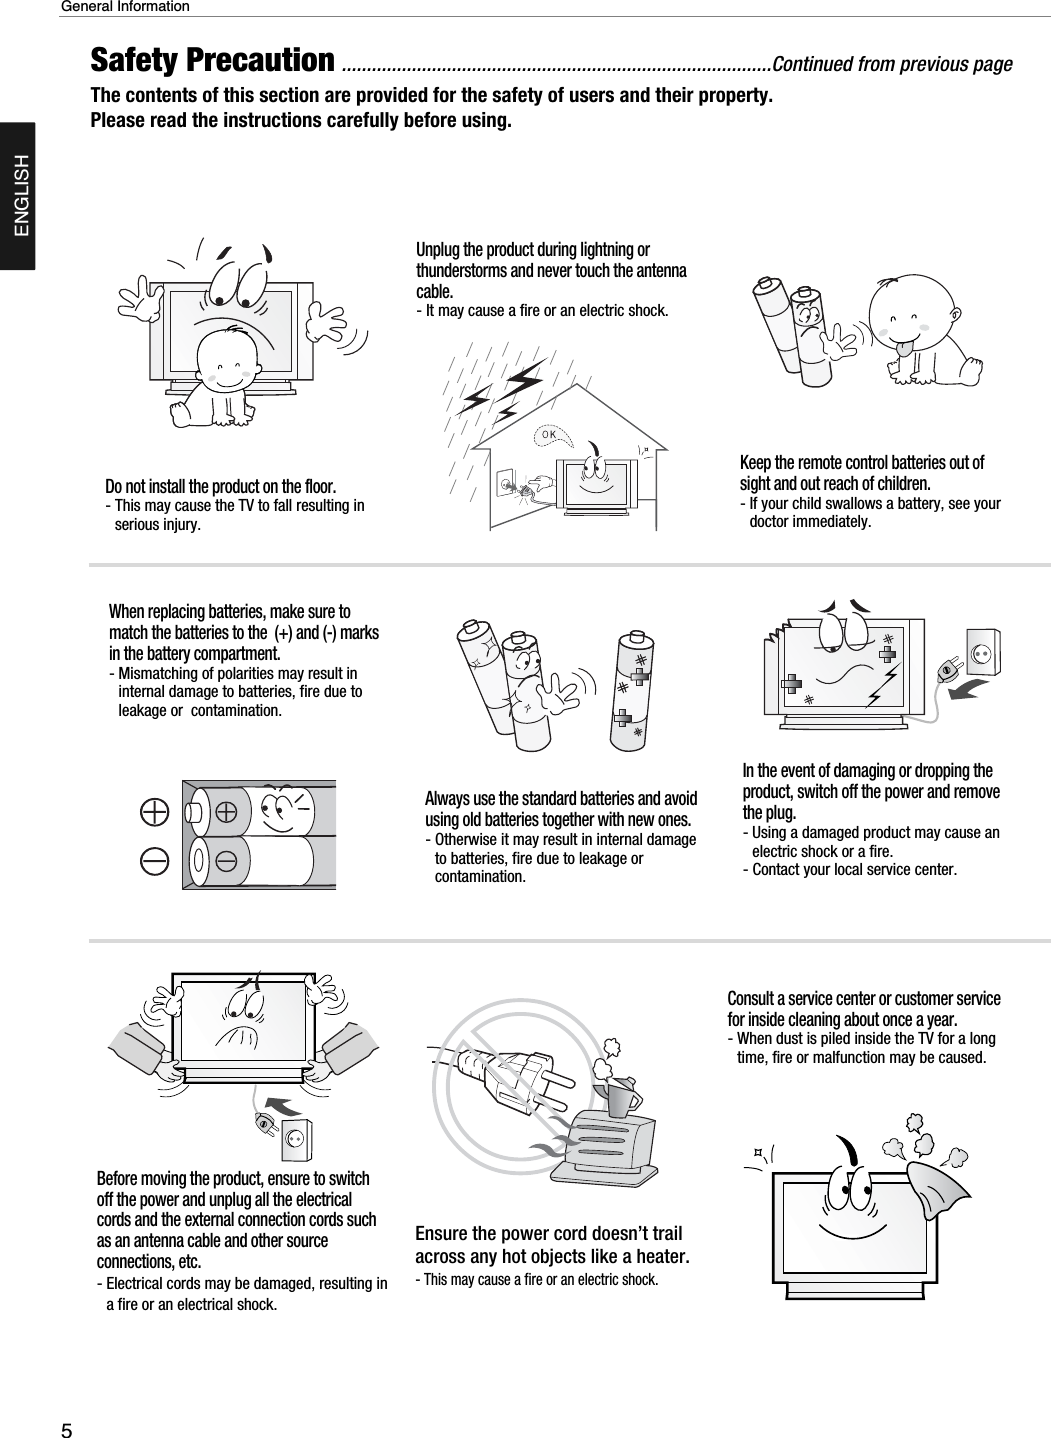 5General InformationENGLISHDo not install the product on the floor.- This may cause the TV to fall resulting inserious injury.Unplug the product during lightning orthunderstorms and never touch the antennacable.- It may cause a fire or an electric shock.Keep the remote control batteries out ofsight and out reach of children.- If your child swallows a battery, see yourdoctor immediately.When replacing batteries, make sure tomatch the batteries to the  (+) and (-) marksin the battery compartment.- Mismatching of polarities may result ininternal damage to batteries, fire due toleakage or  contamination.Always use the standard batteries and avoidusing old batteries together with new ones.- Otherwise it may result in internal damageto batteries, fire due to leakage orcontamination.In the event of damaging or dropping theproduct, switch off the power and removethe plug.- Using a damaged product may cause anelectric shock or a fire.- Contact your local service center.Before moving the product, ensure to switchoff the power and unplug all the electricalcords and the external connection cords suchas an antenna cable and other sourceconnections, etc.- Electrical cords may be damaged, resulting ina fire or an electrical shock.Ensure the power cord doesn’t trailacross any hot objects like a heater.- This may cause a fire or an electric shock.Consult a service center or customer servicefor inside cleaning about once a year.- When dust is piled inside the TV for a longtime, fire or malfunction may be caused.Safety Precaution ......................................................................................Continued from previous pageThe contents of this section are provided for the safety of users and their property.Please read the instructions carefully before using.